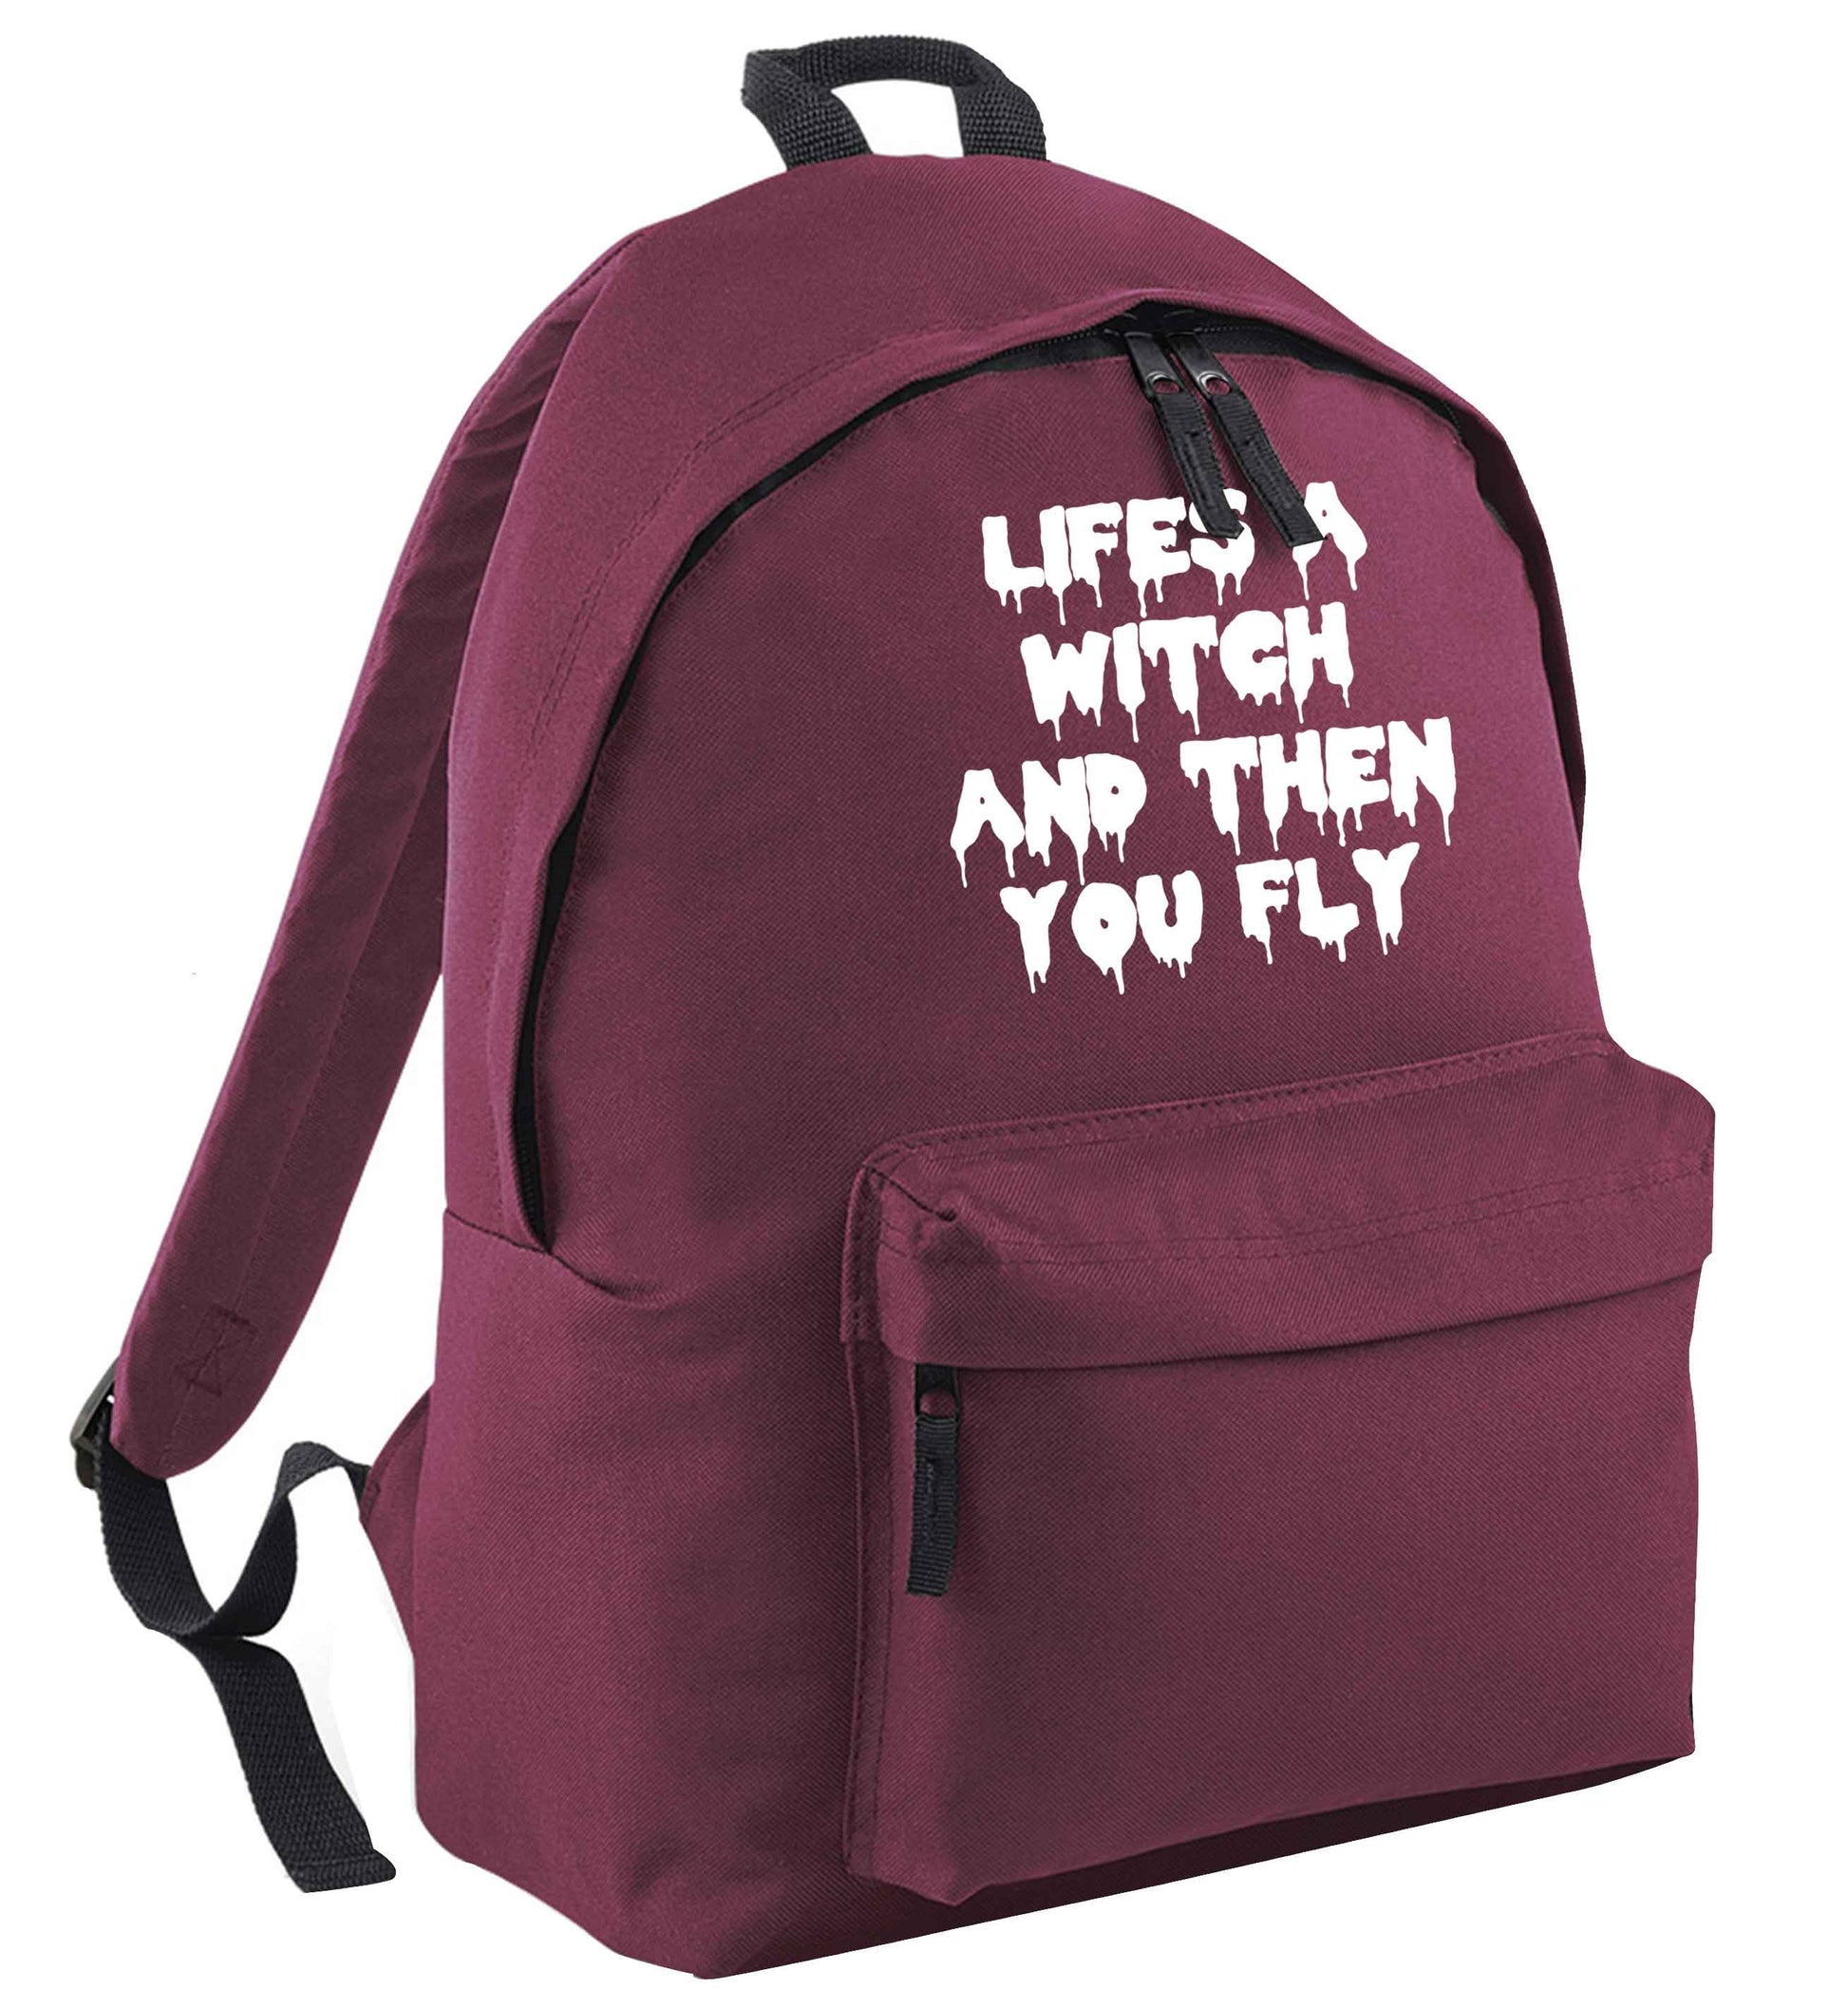 Life's a witch and then you fly maroon adults backpack